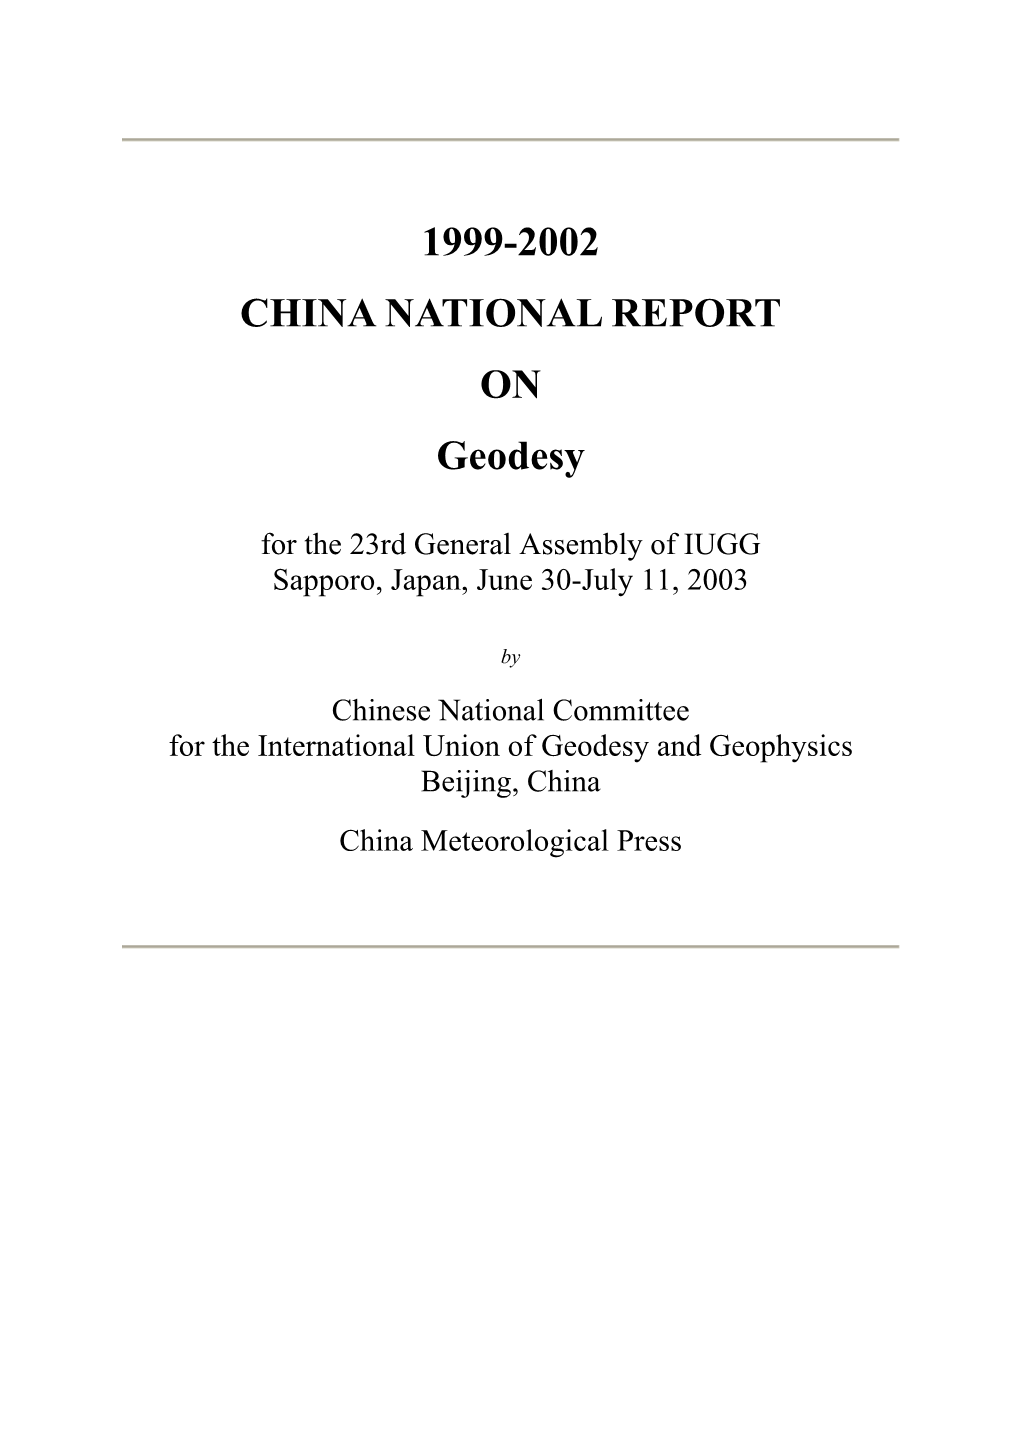 1999-2002 CHINA NATIONAL REPORT on Geodesy